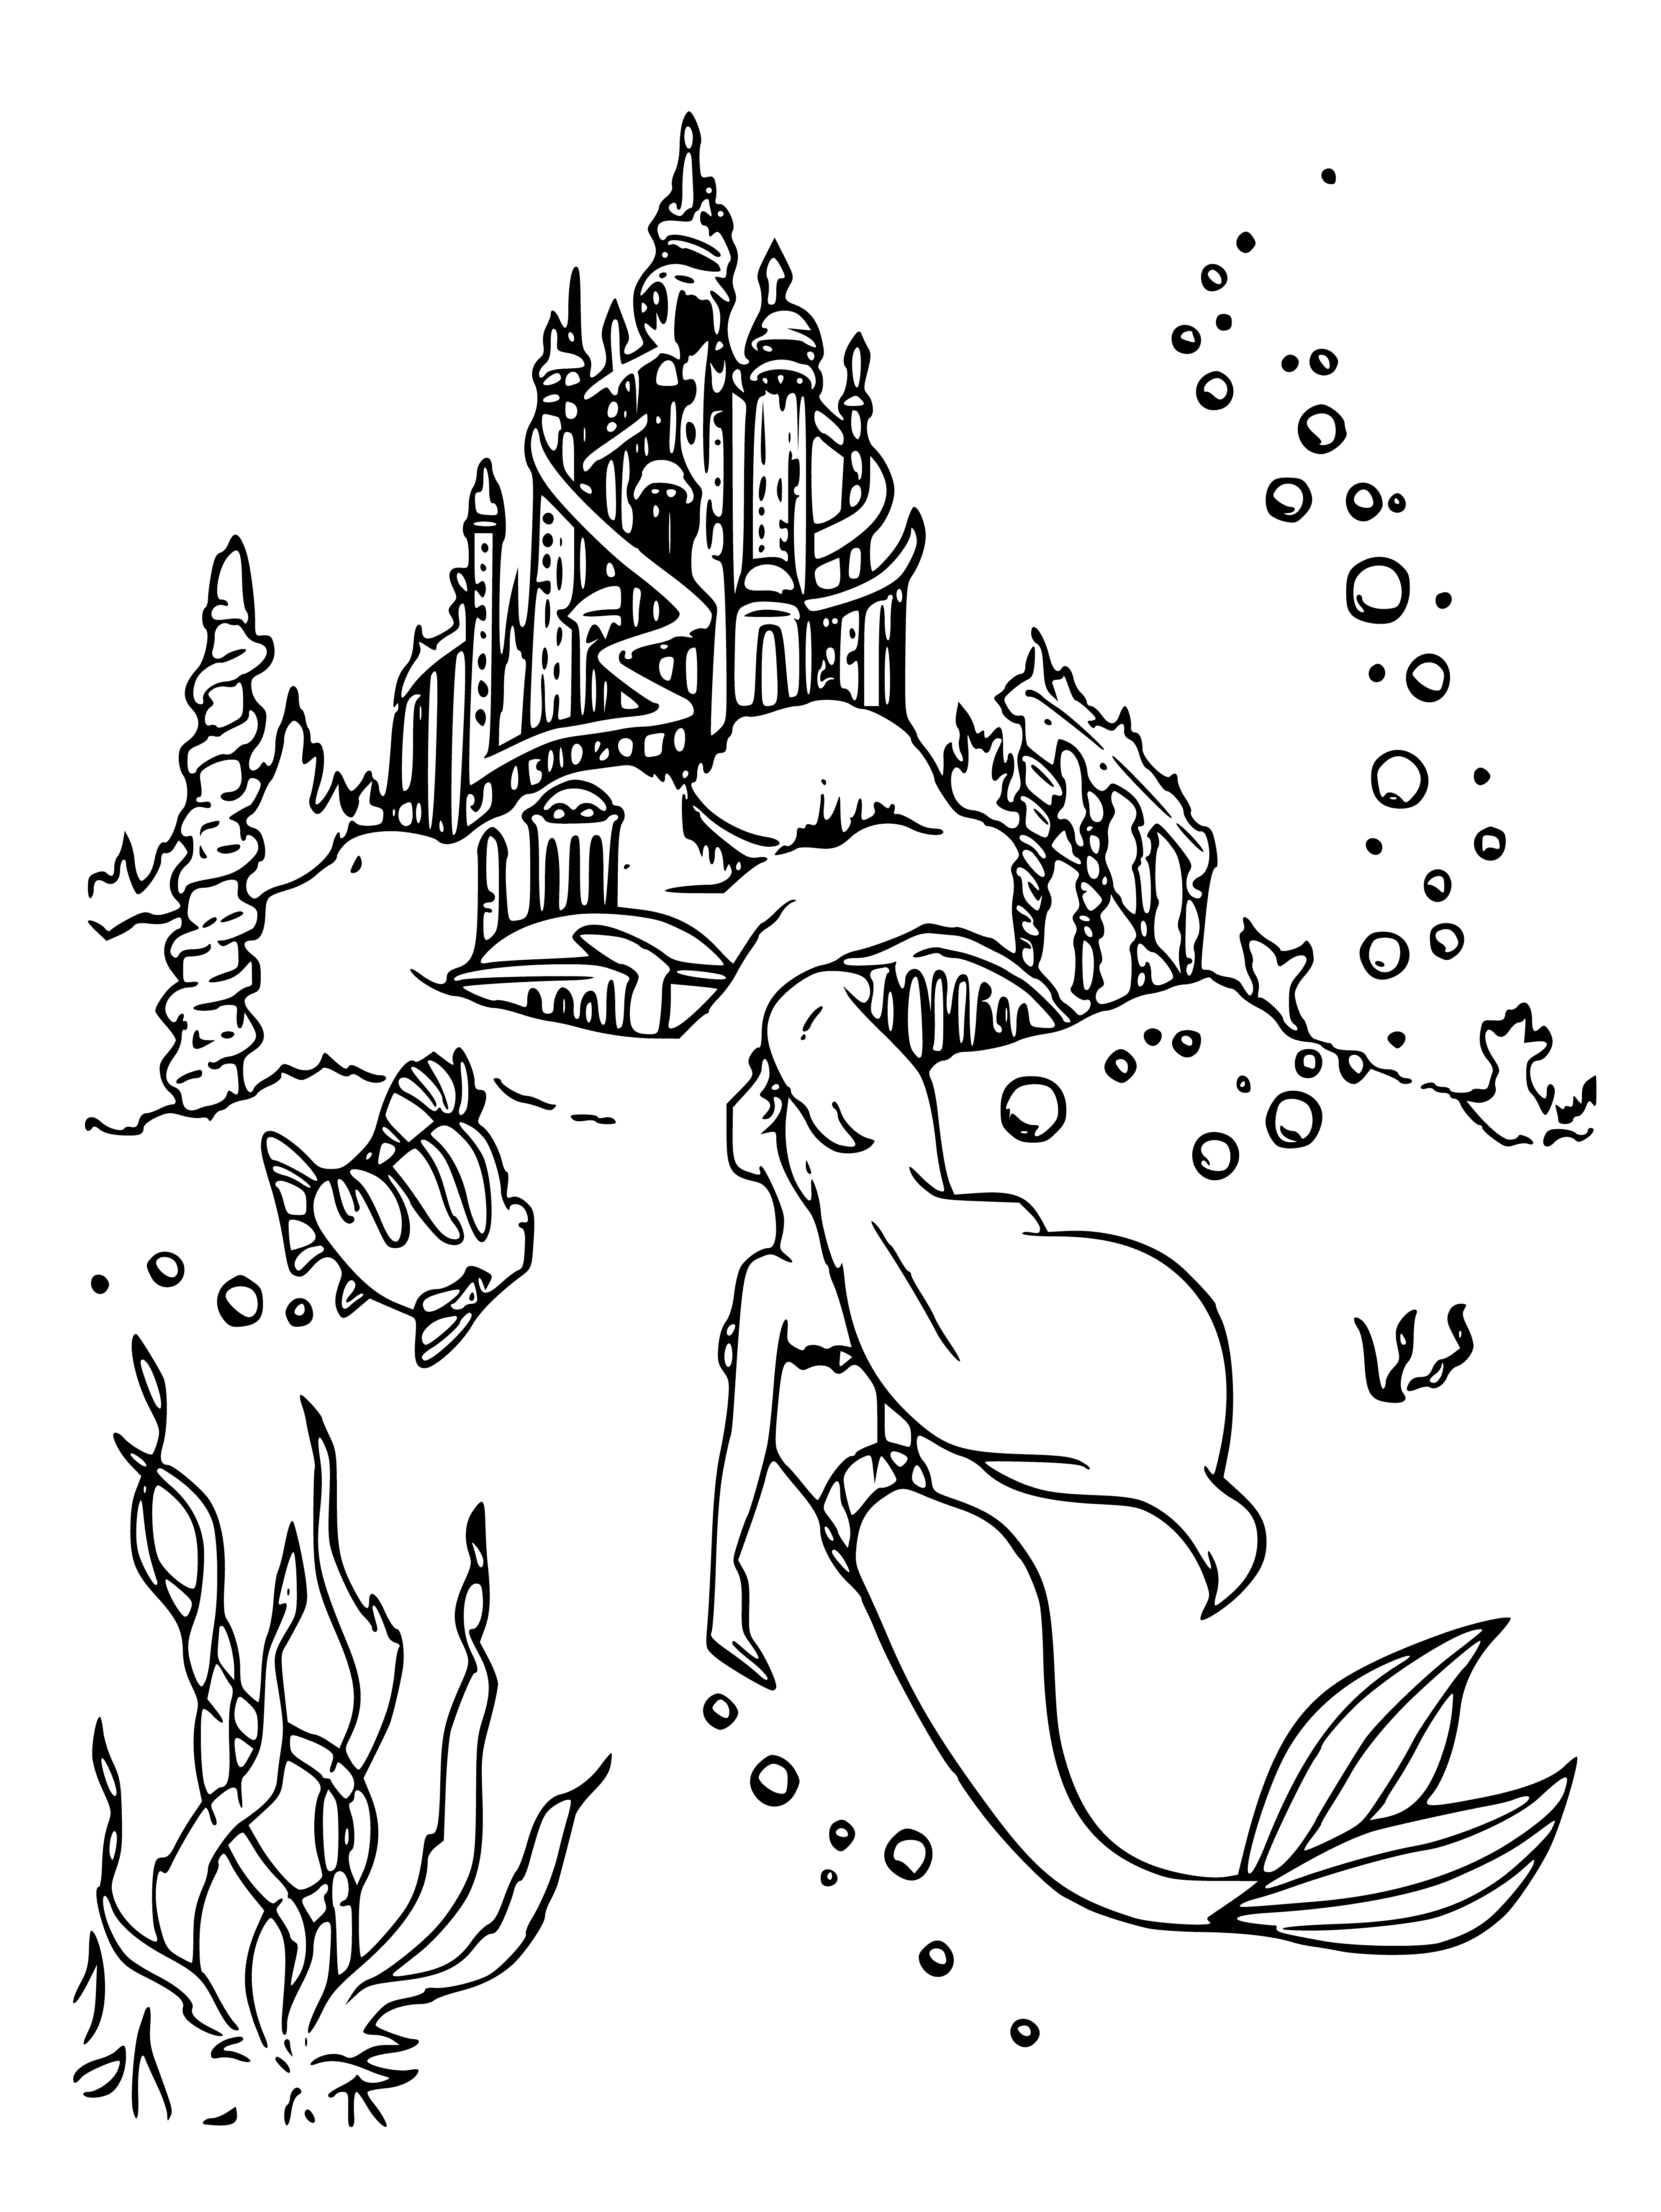 Underwater palace coloring page